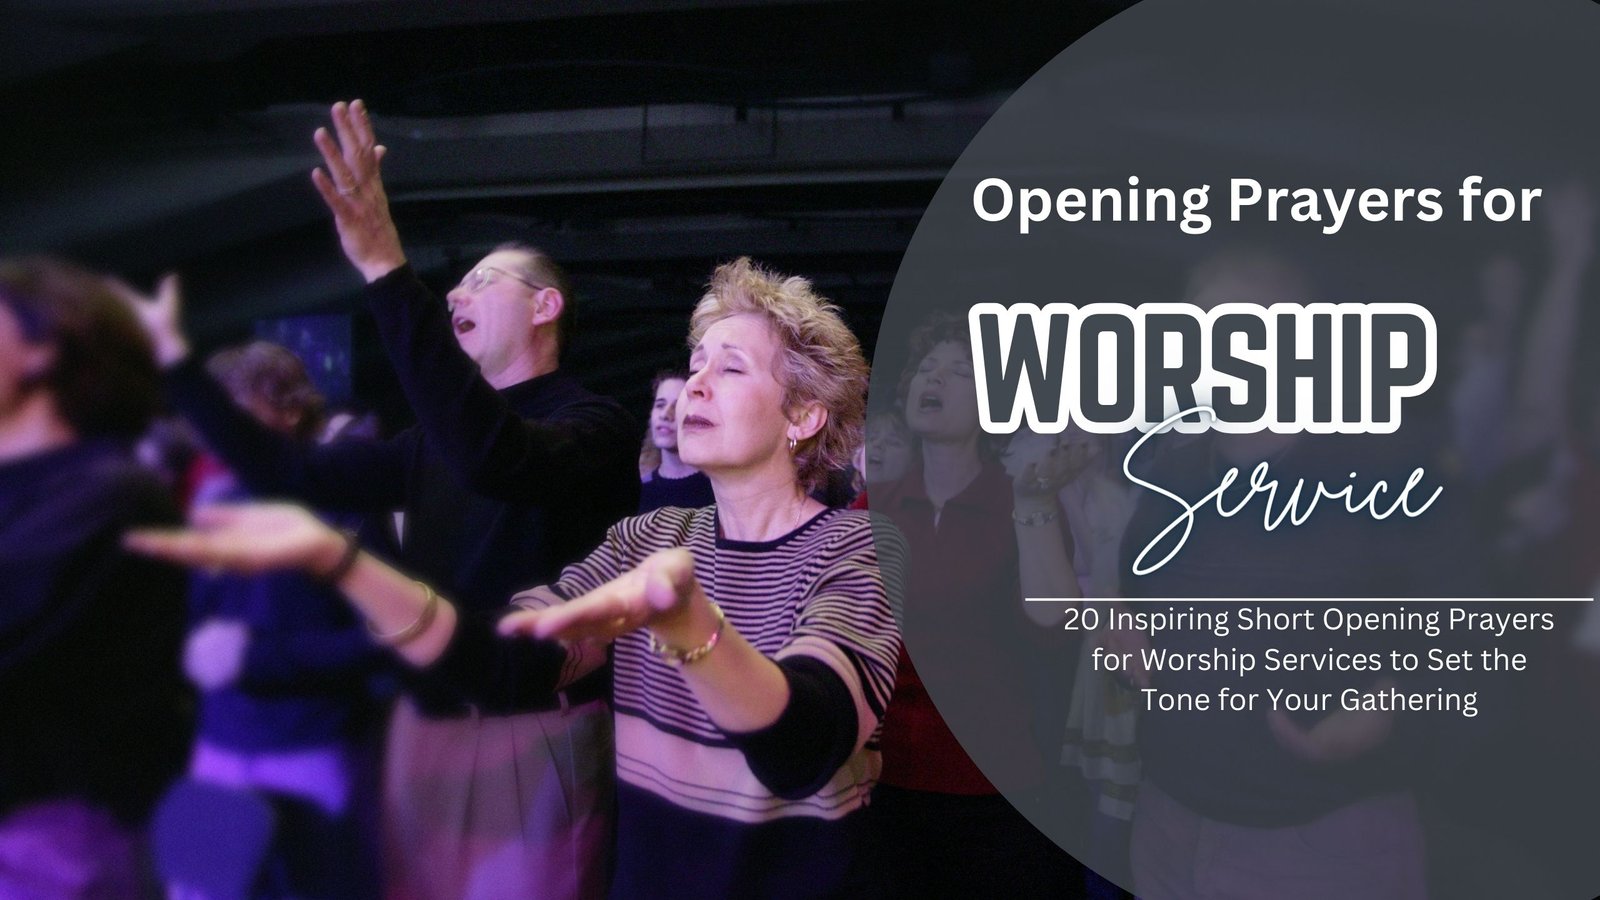 20 Inspiring Short Opening Prayers for Worship Services to Set the Tone for Your Gathering